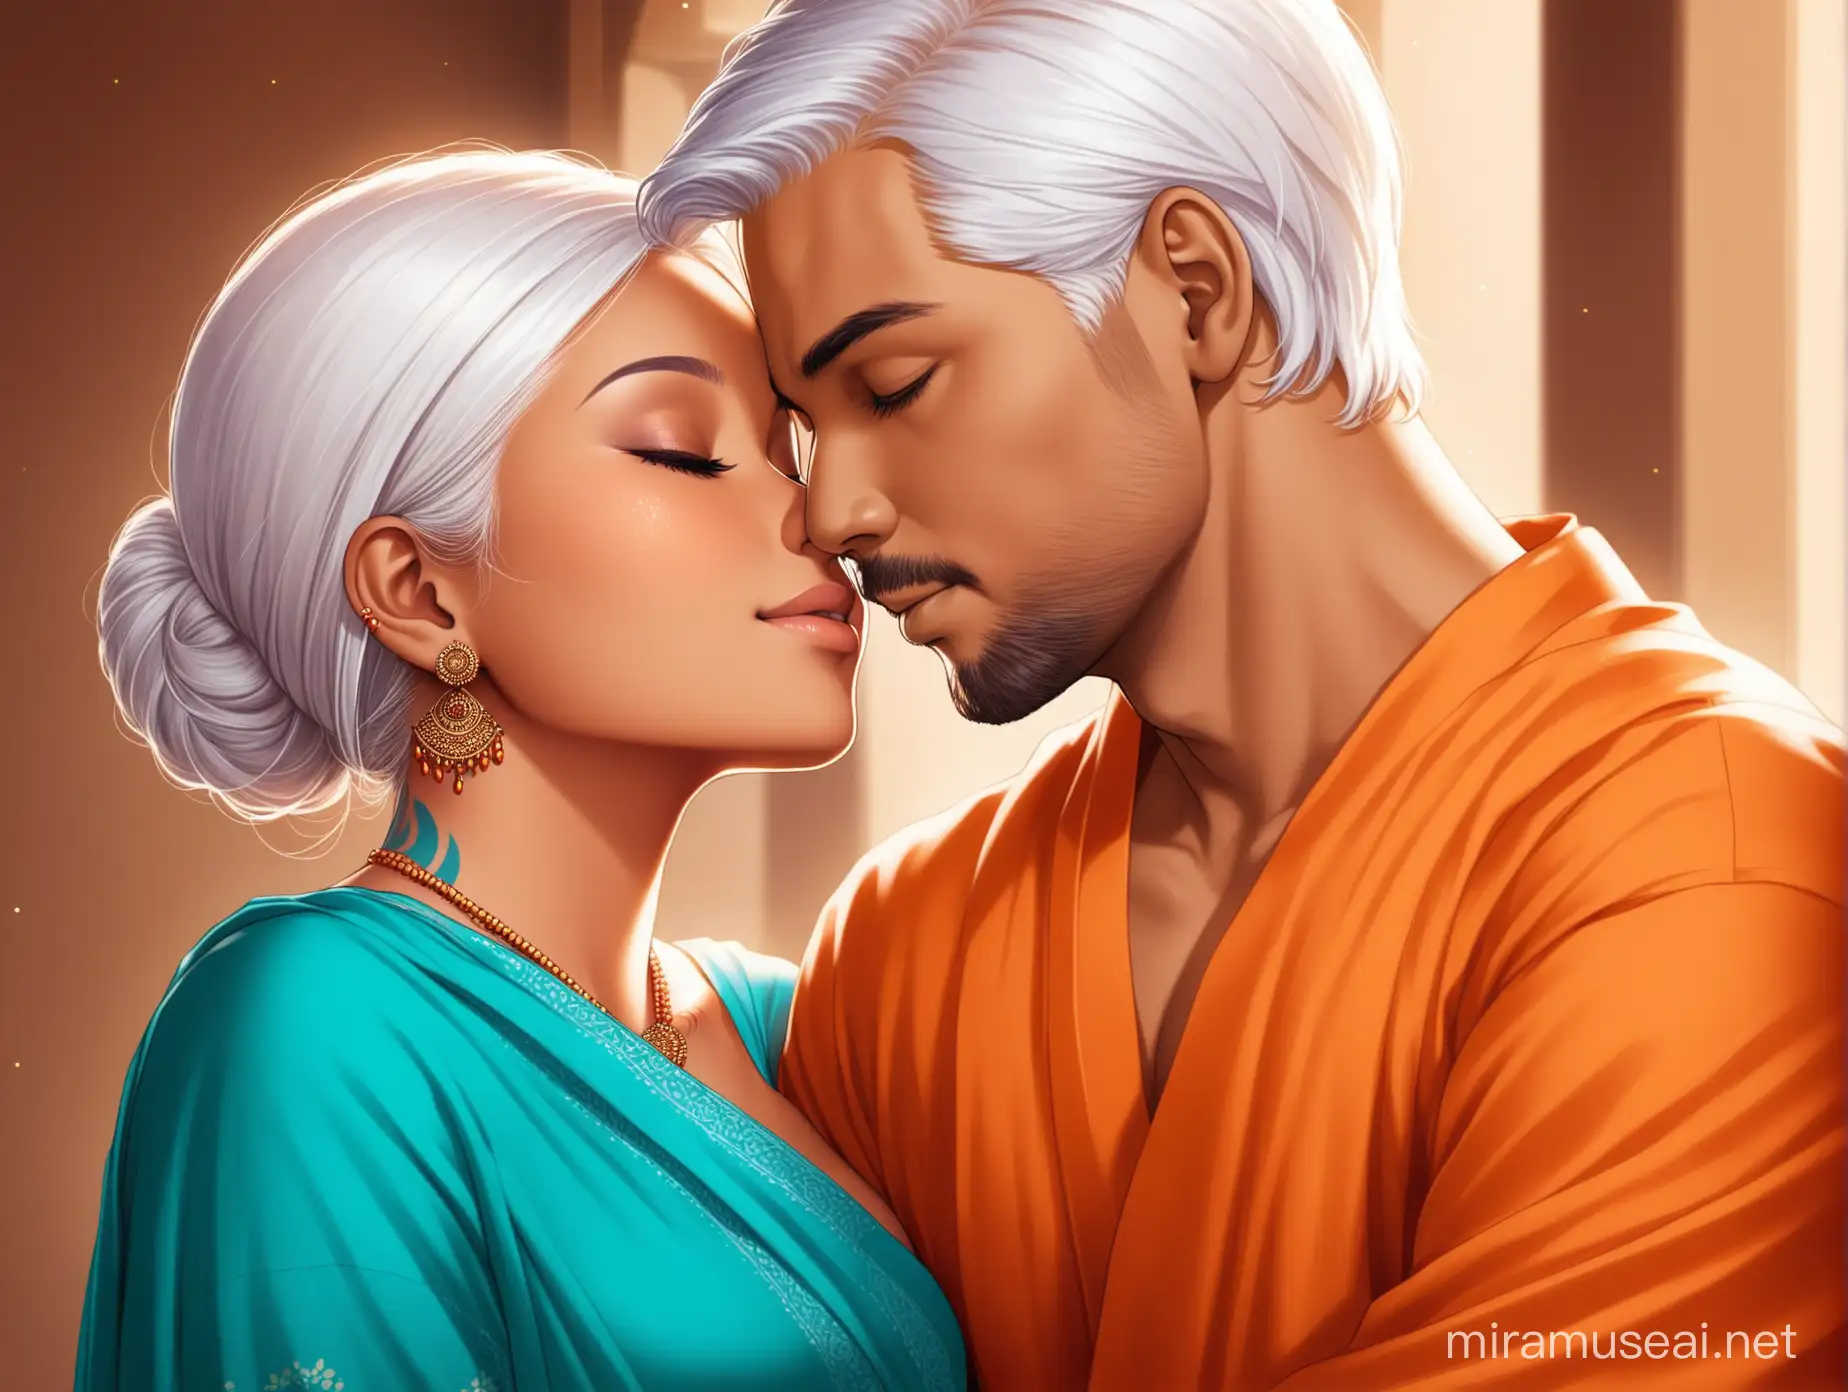 (A couple tenderly embracing and kissing each other; 1 woman, 1 man,) The woman is mature and beautiful, she has: white hair, tanned brown skin, blue arrow tattoos and wears an orange sari. The man is mature and handsome, he has: black short styled hair, light skin and wears a red robe.